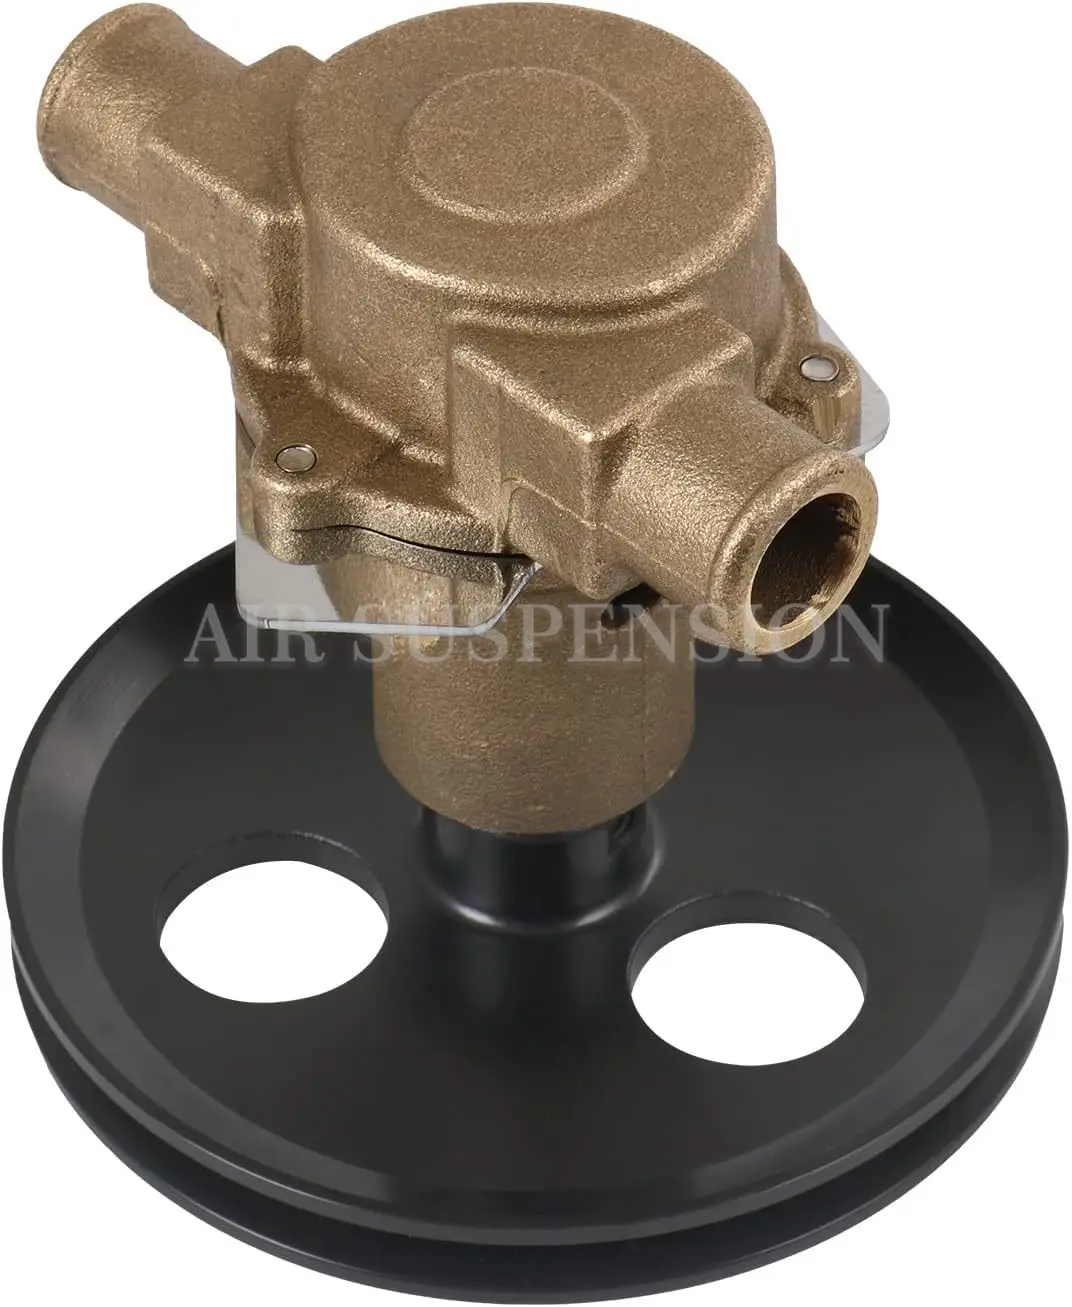 

RA057007 1" Ports Raw Sea Impeller Water Pump For Ford Marine 5.0, 5.8, 351, 302 for Sherwood Pleasurecraft G20, G21, G-21, PCM